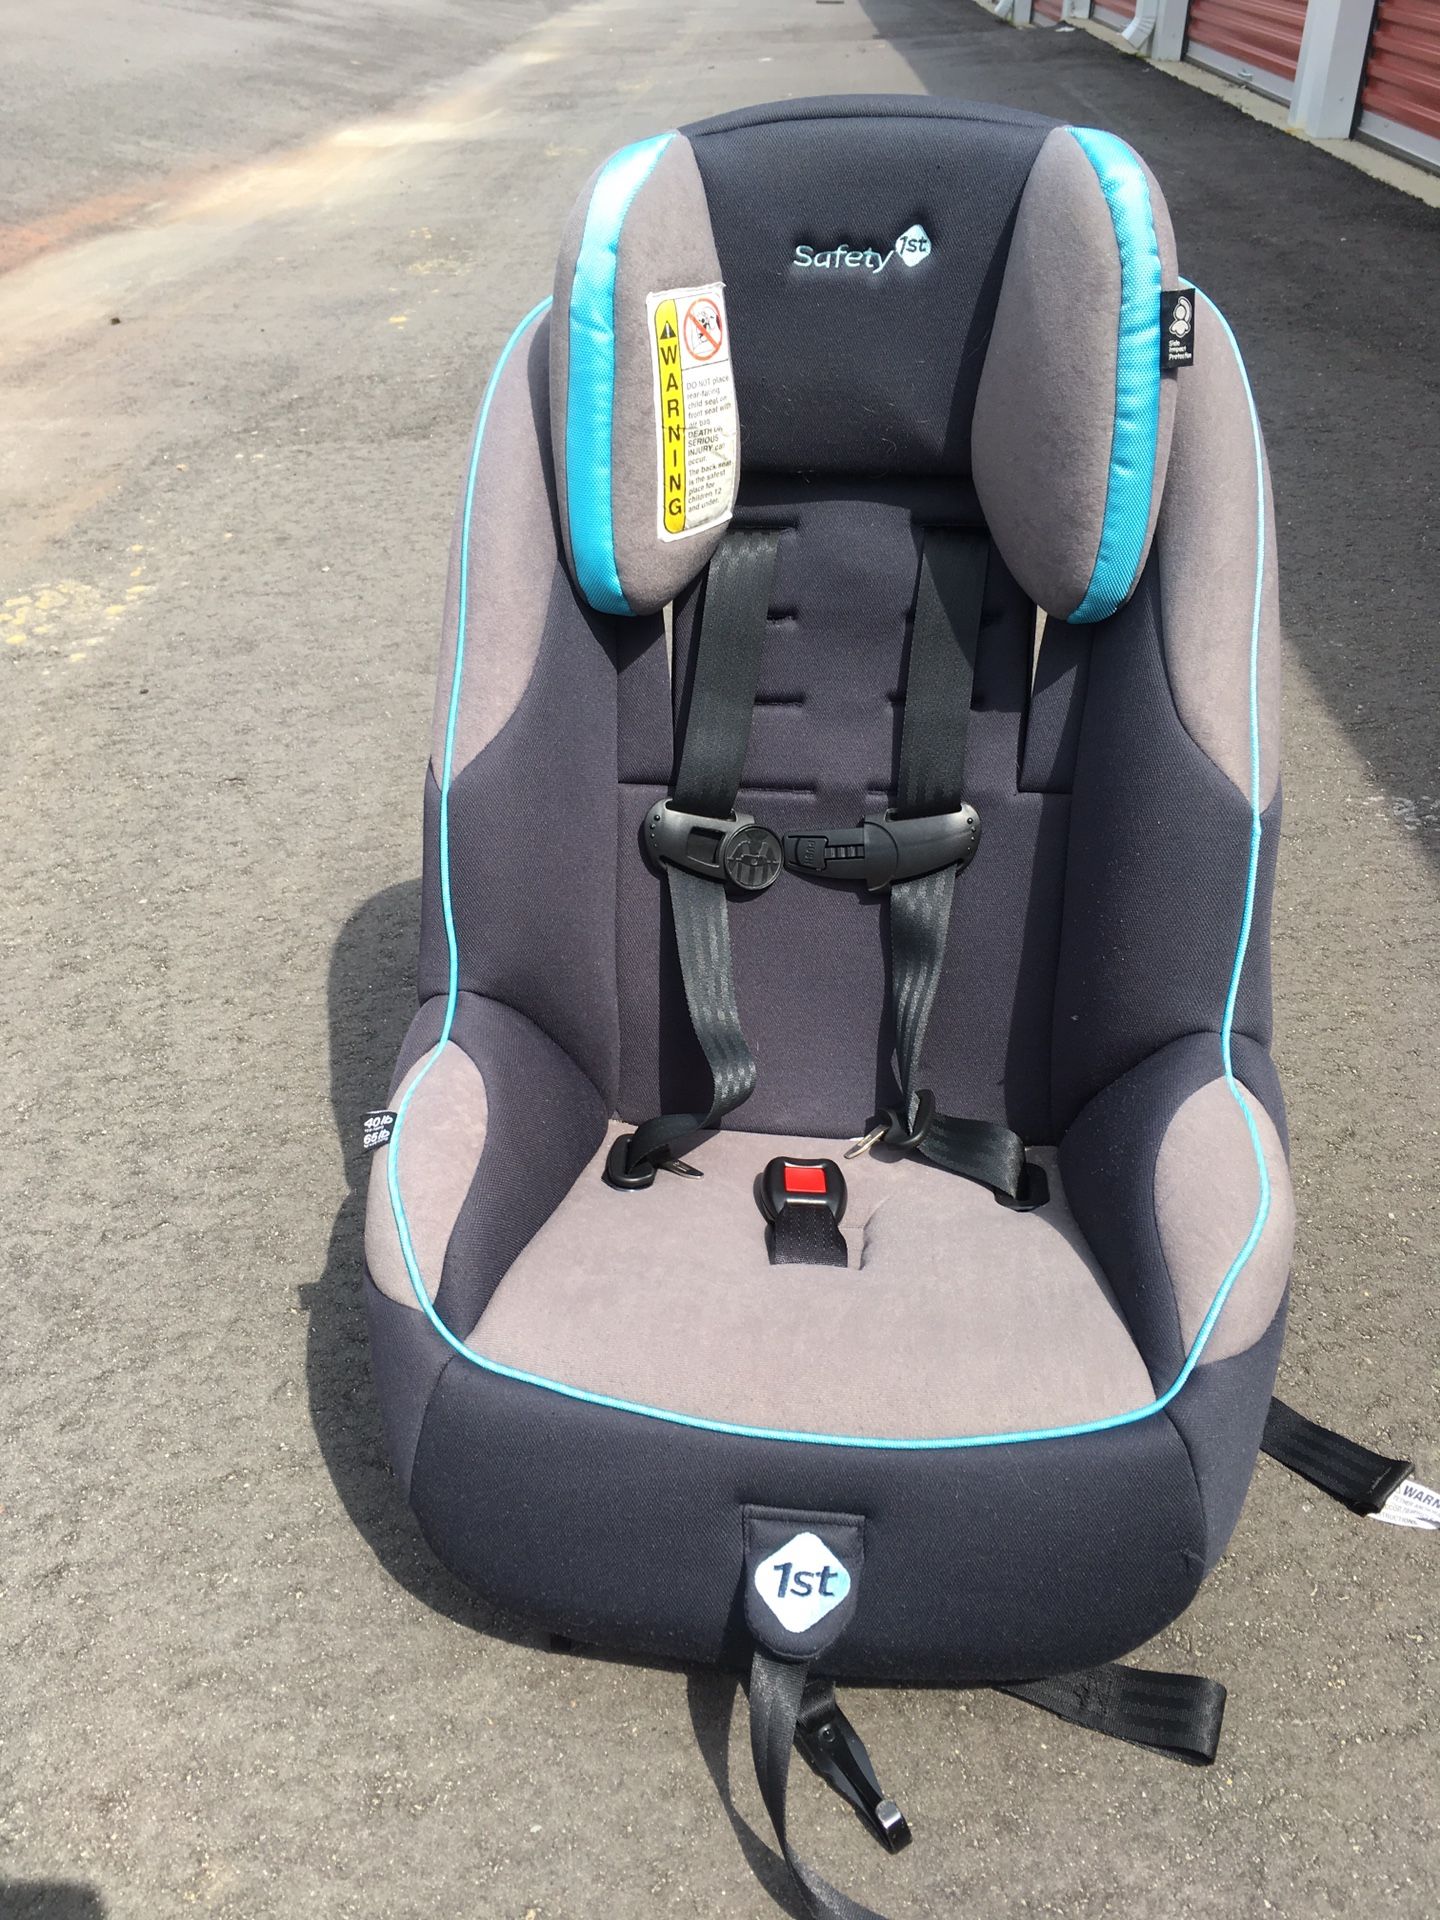 Safety first convertible 65 blue/gray car seat